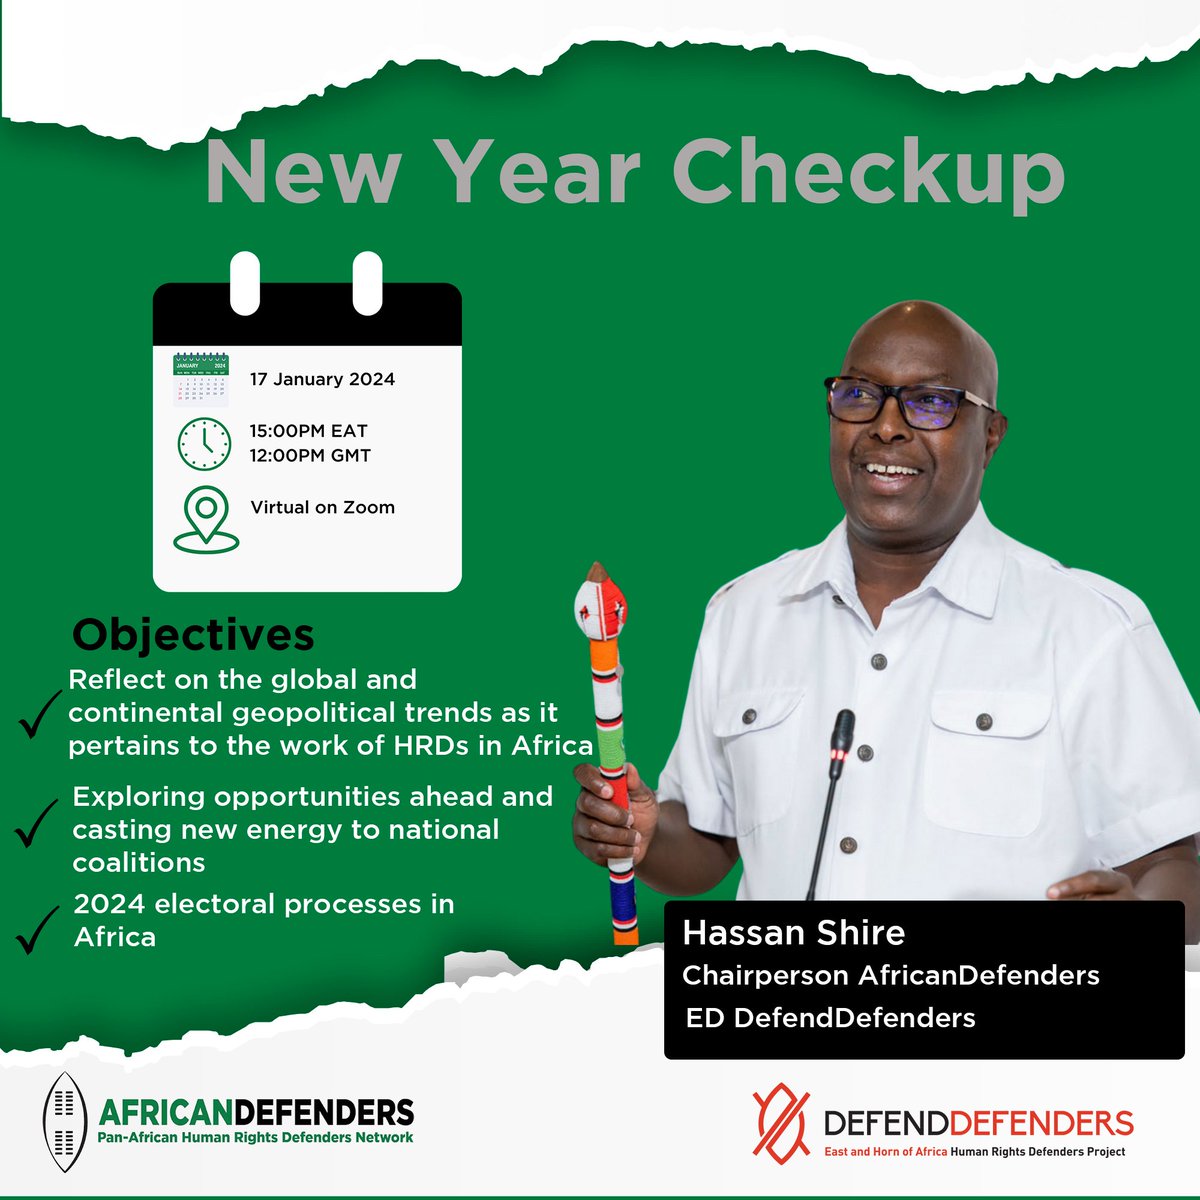 Happy New Year! We have some Exciting News! Our Chairperson, @Hassan_Shire, & ED of @DefendDefenders, is hosting the inaugural New Year Checkup with human rights defenders across #Africa. Join us for insightful discussions on global trends, opportunities, and 2024 electoral